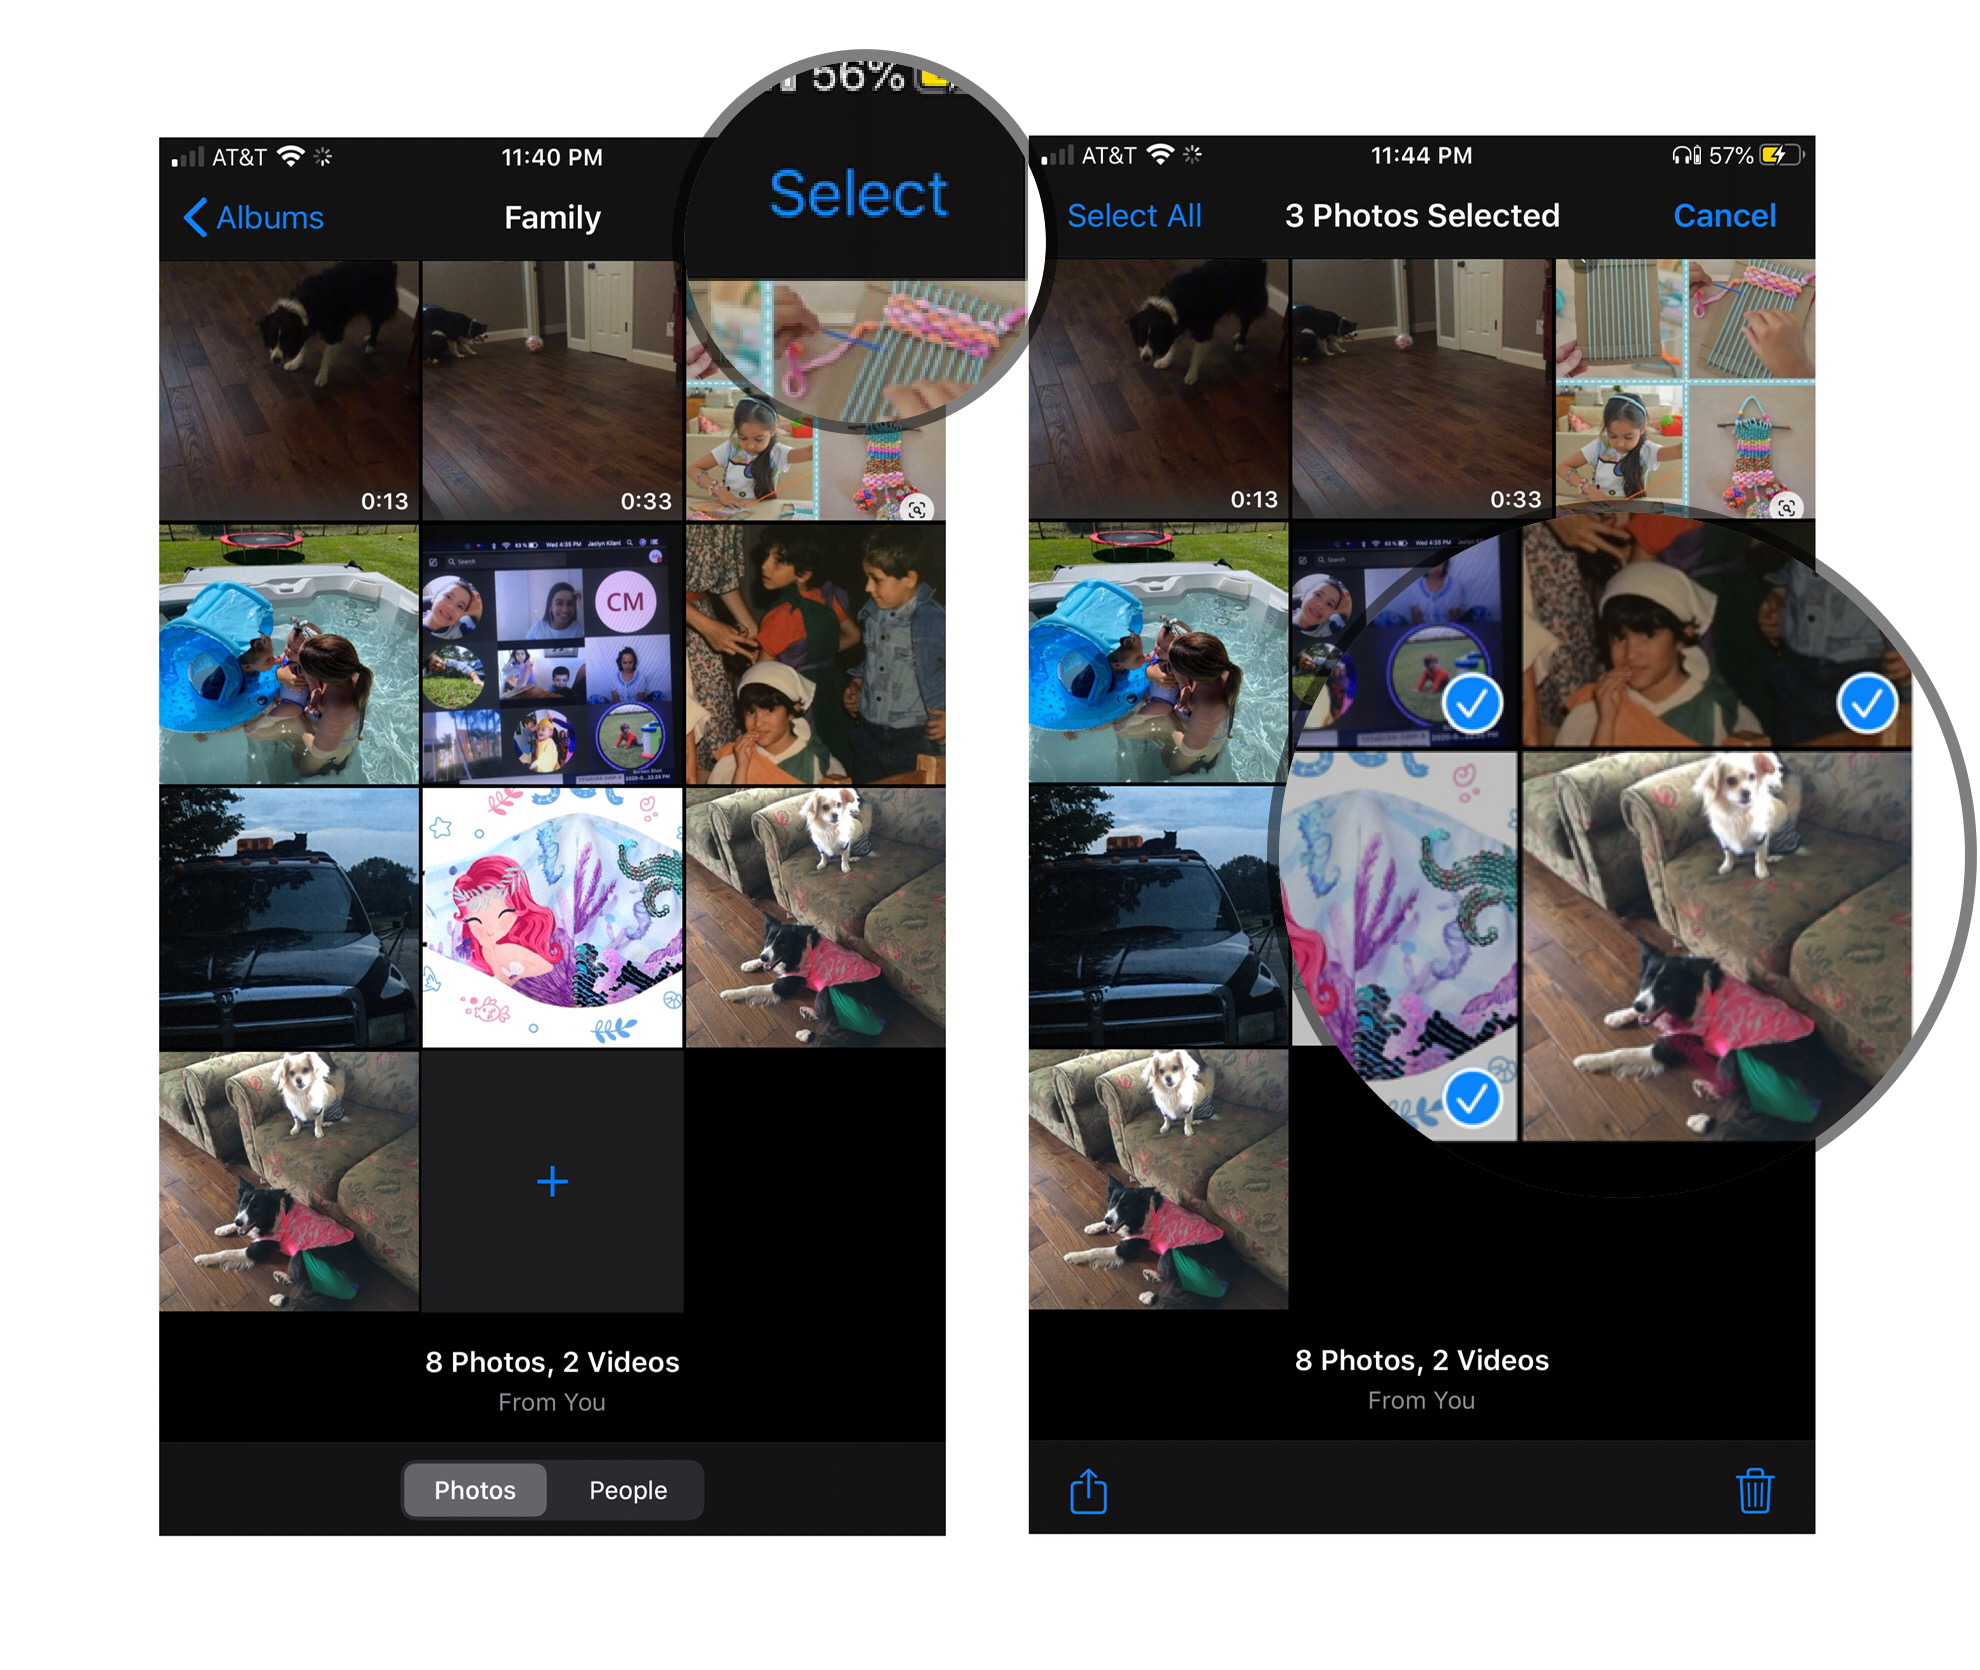 Remove photos or video from Family album on iOS: Tap Select, Select Photos